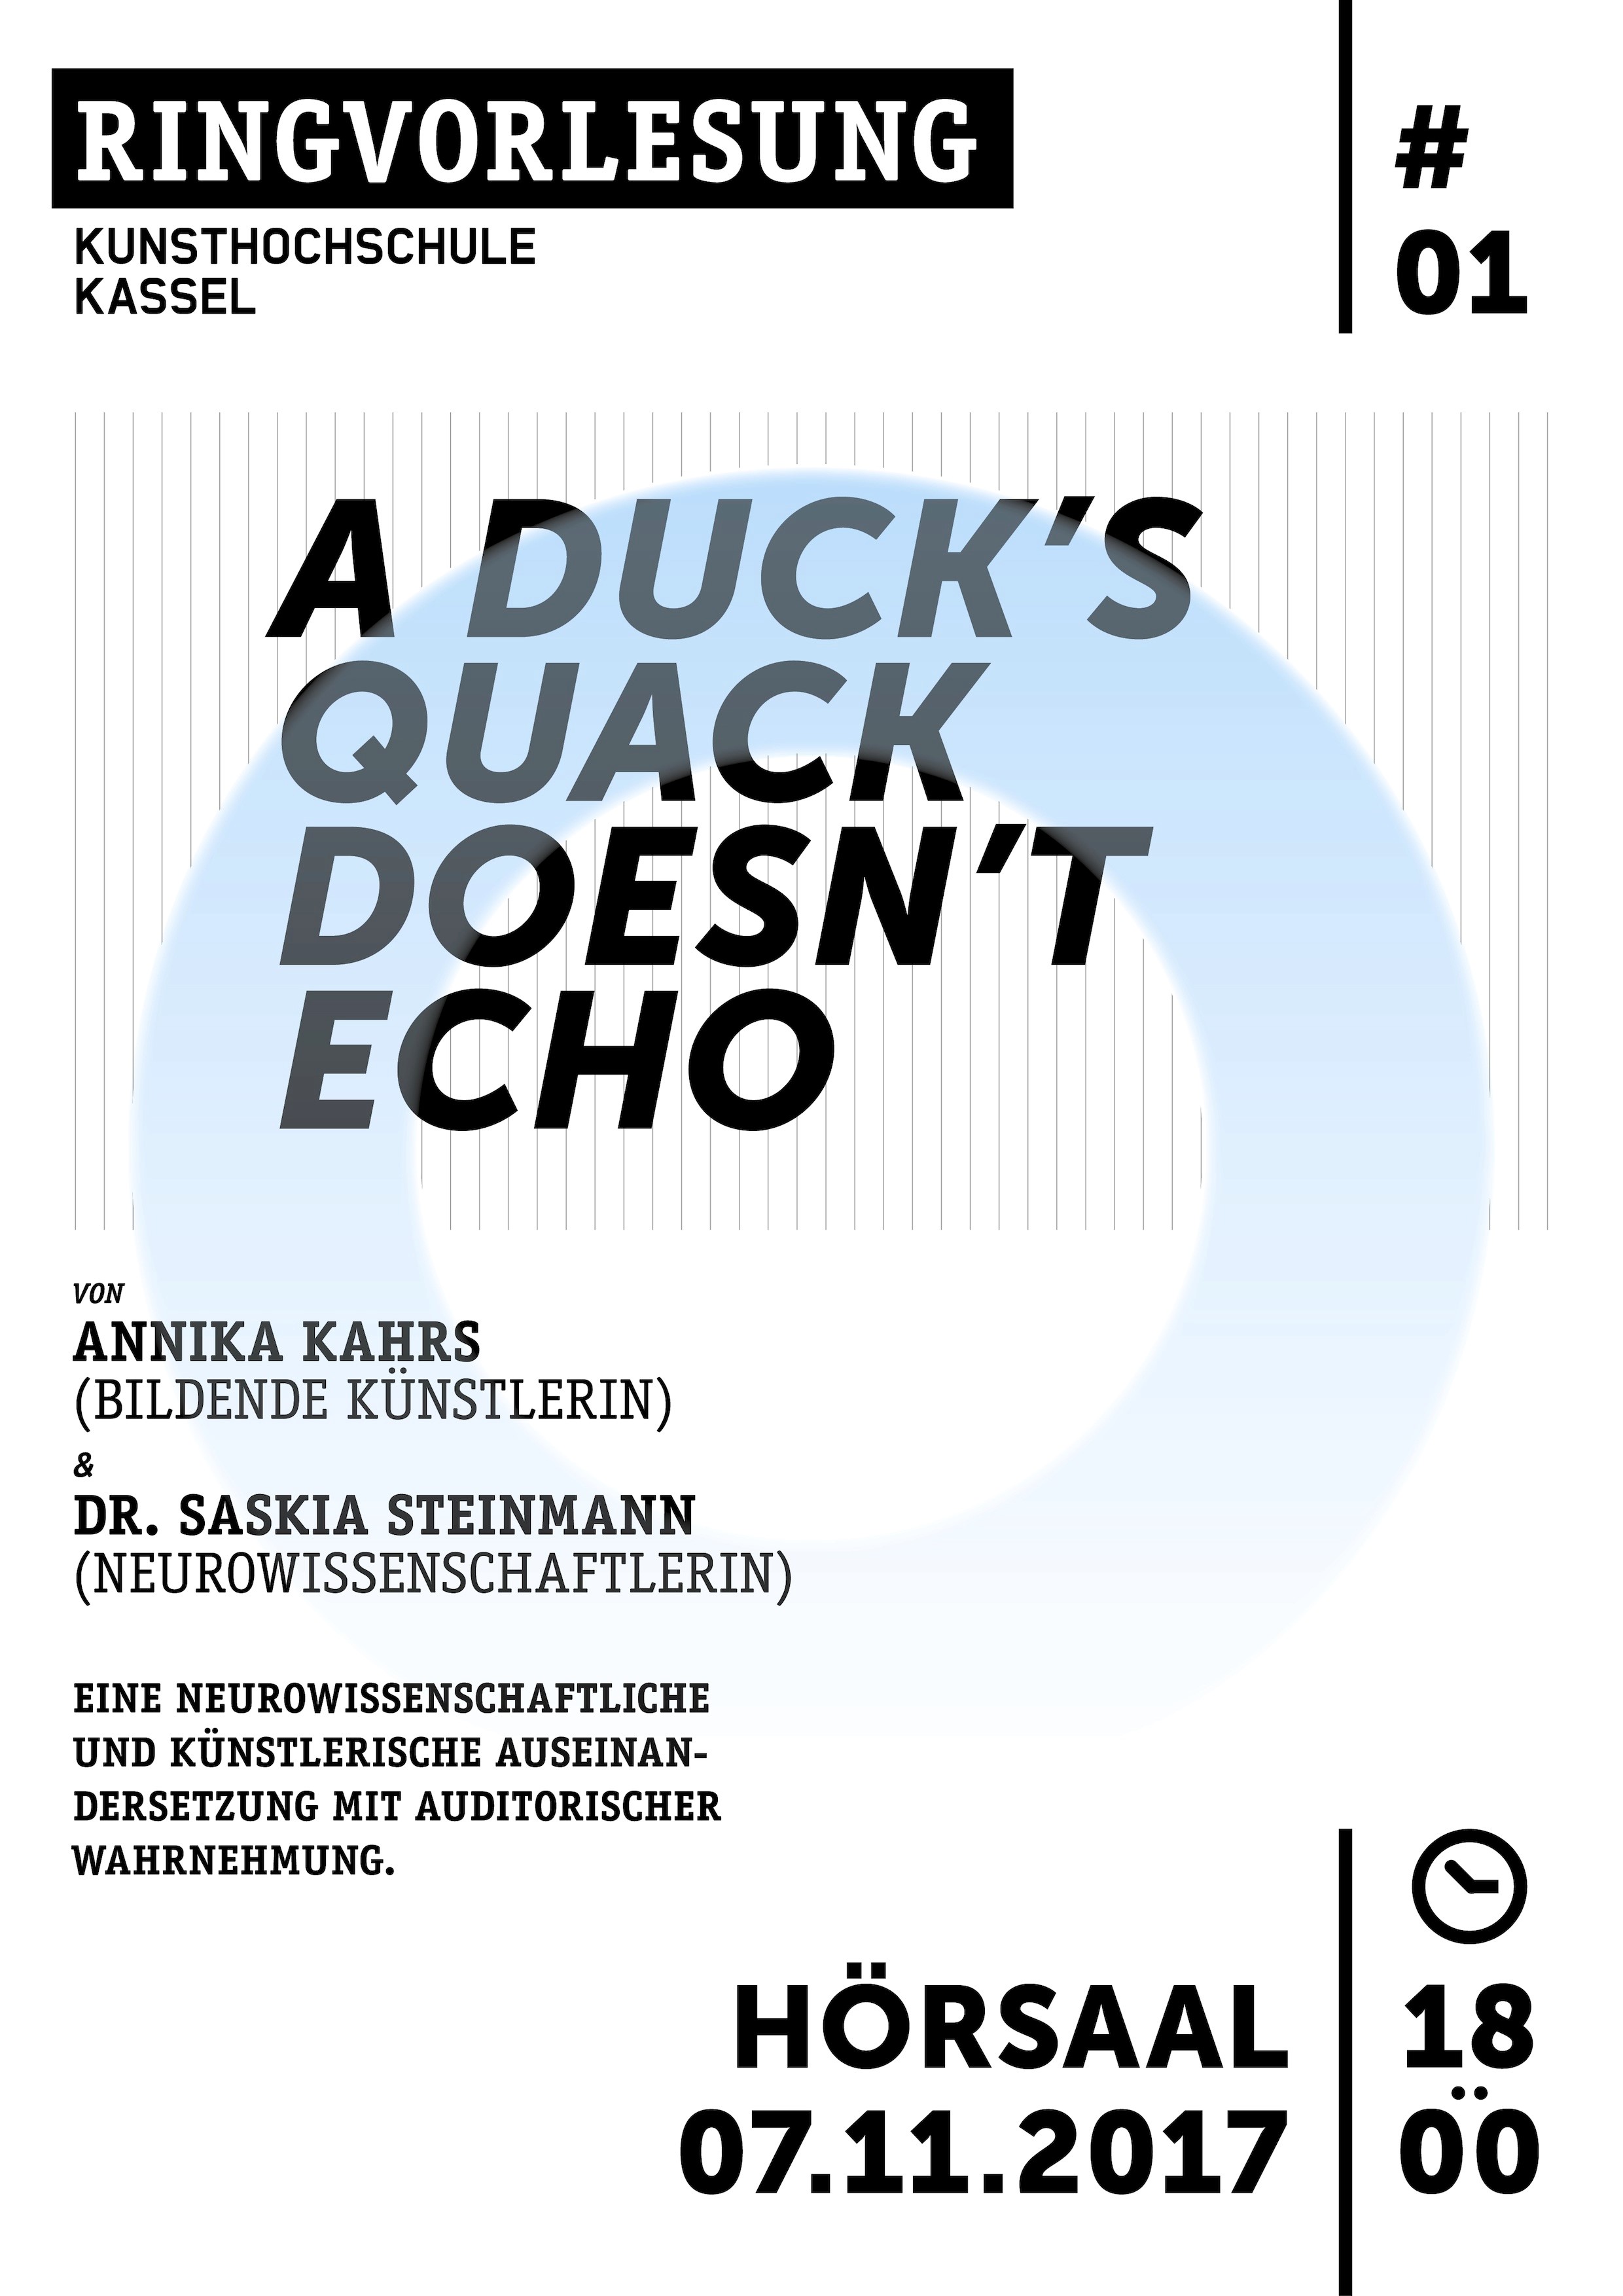 Ringvorlesung: A duck's quack doesn't echo 